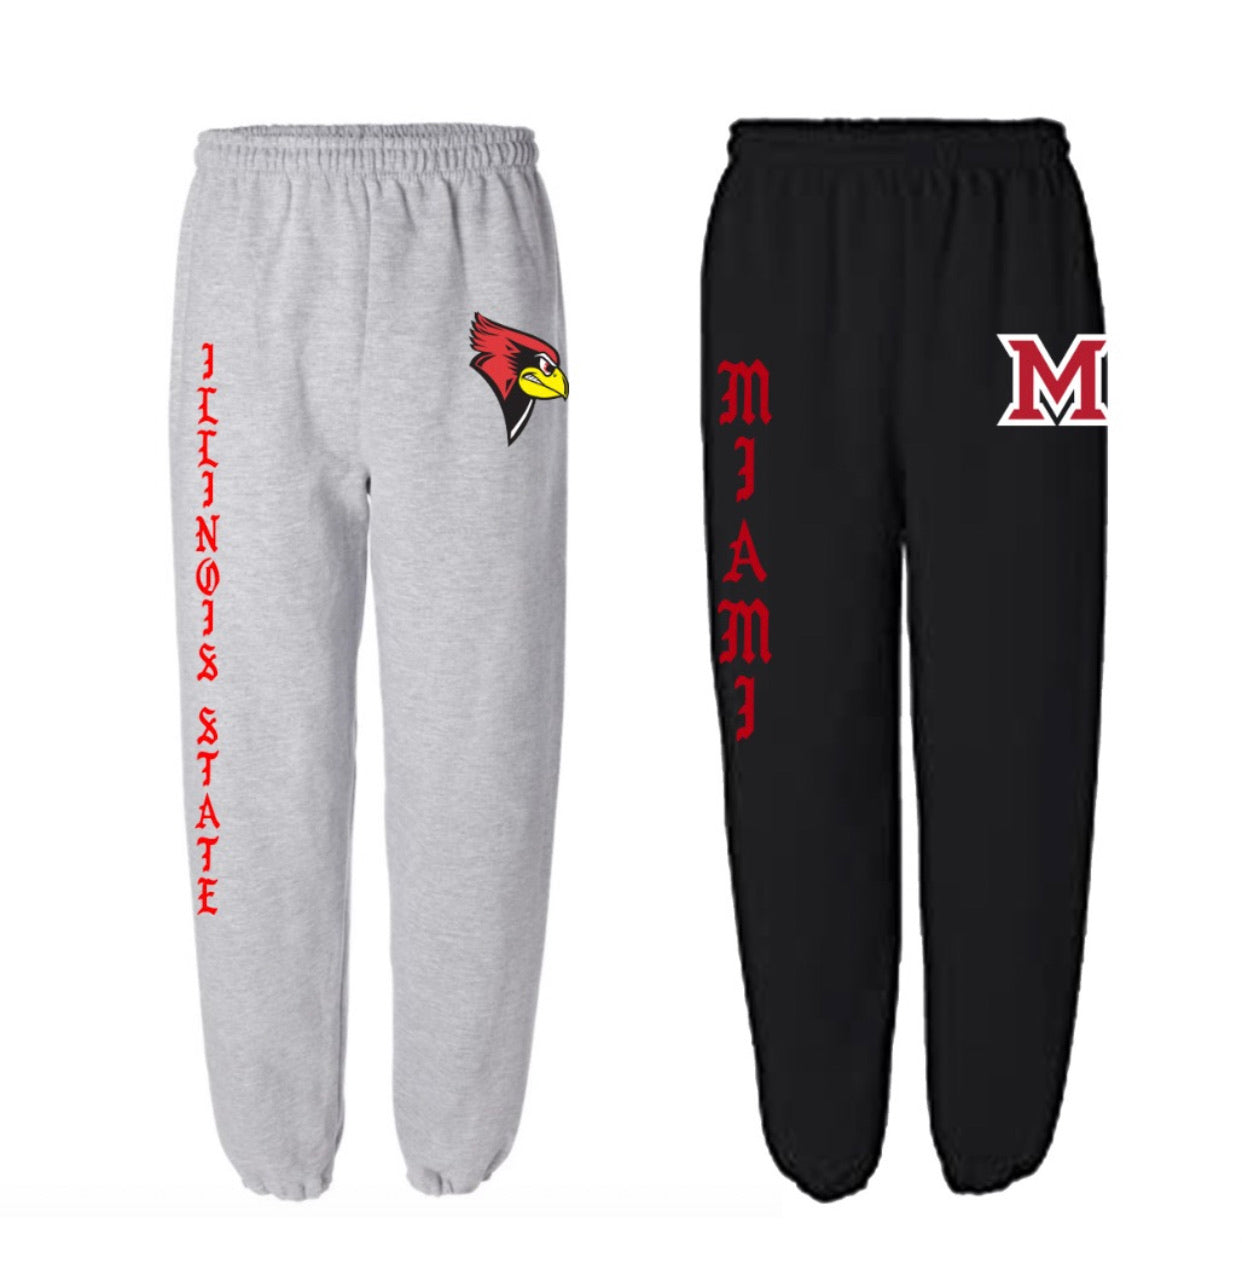 Please note: due to high volume of orders, all orders placed now for this item will arrive end of June. Custom college loose fit sweats (can be made for any school, sorority or camp) - Lisa’s Northbrook